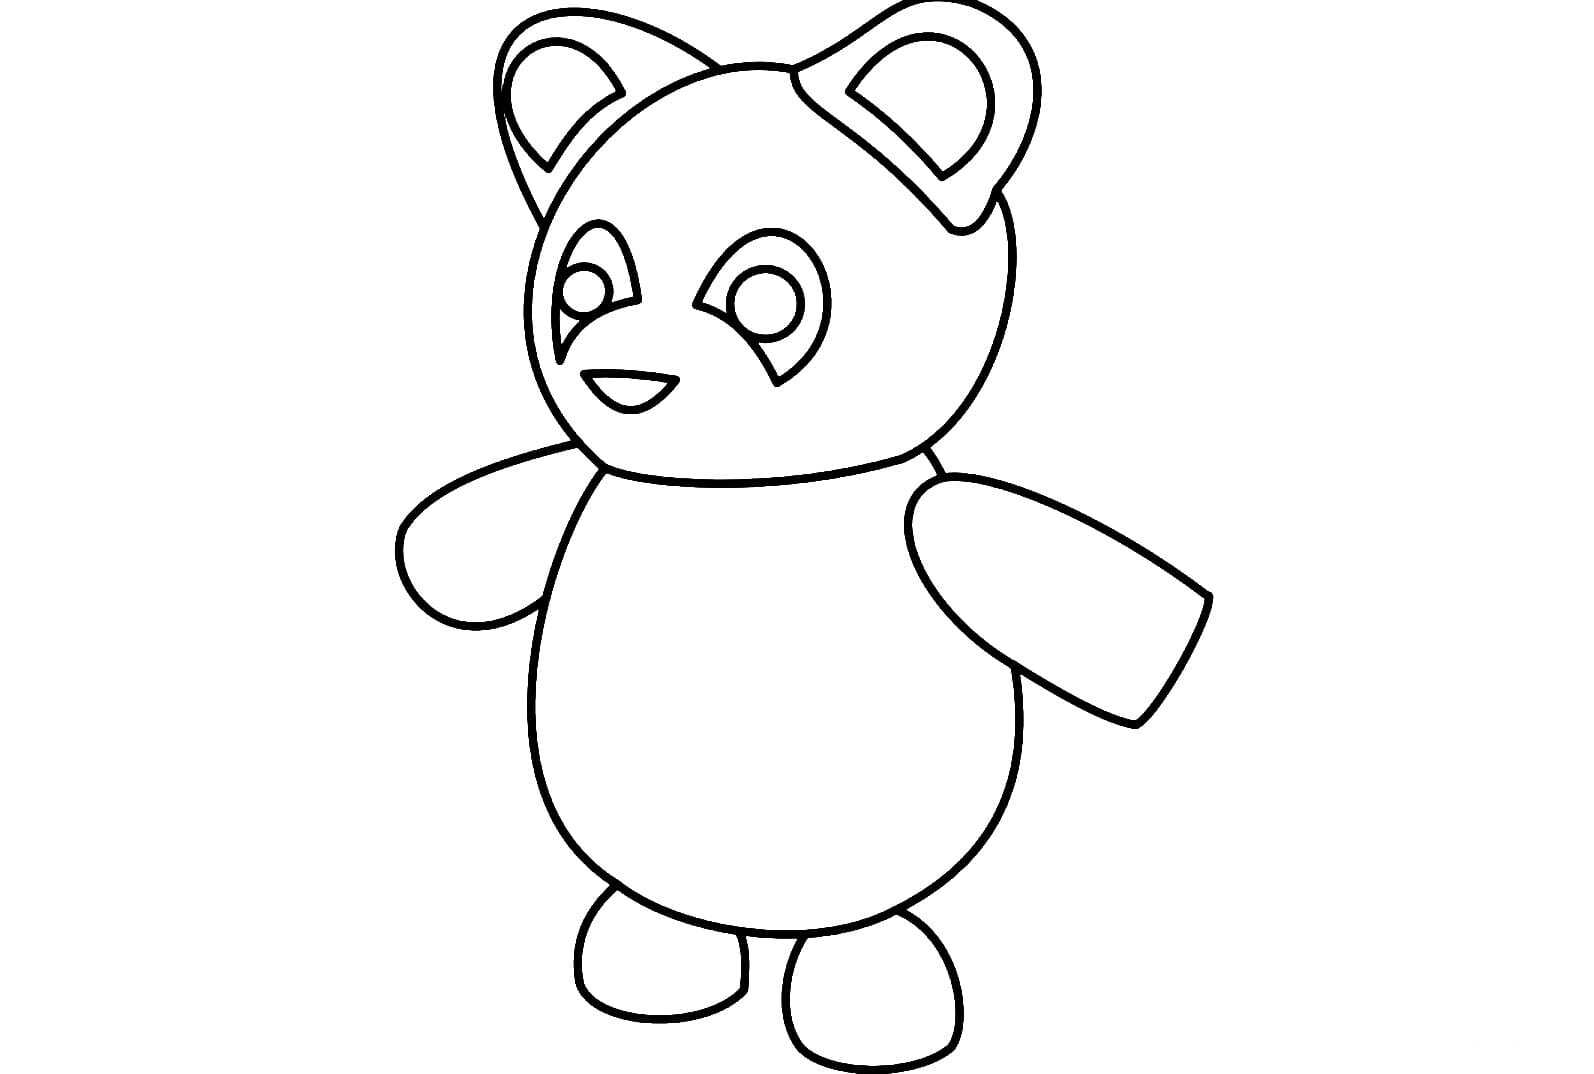 Panda From Adopt Me Follows The Same Structure As Panda Bear Coloring Pages